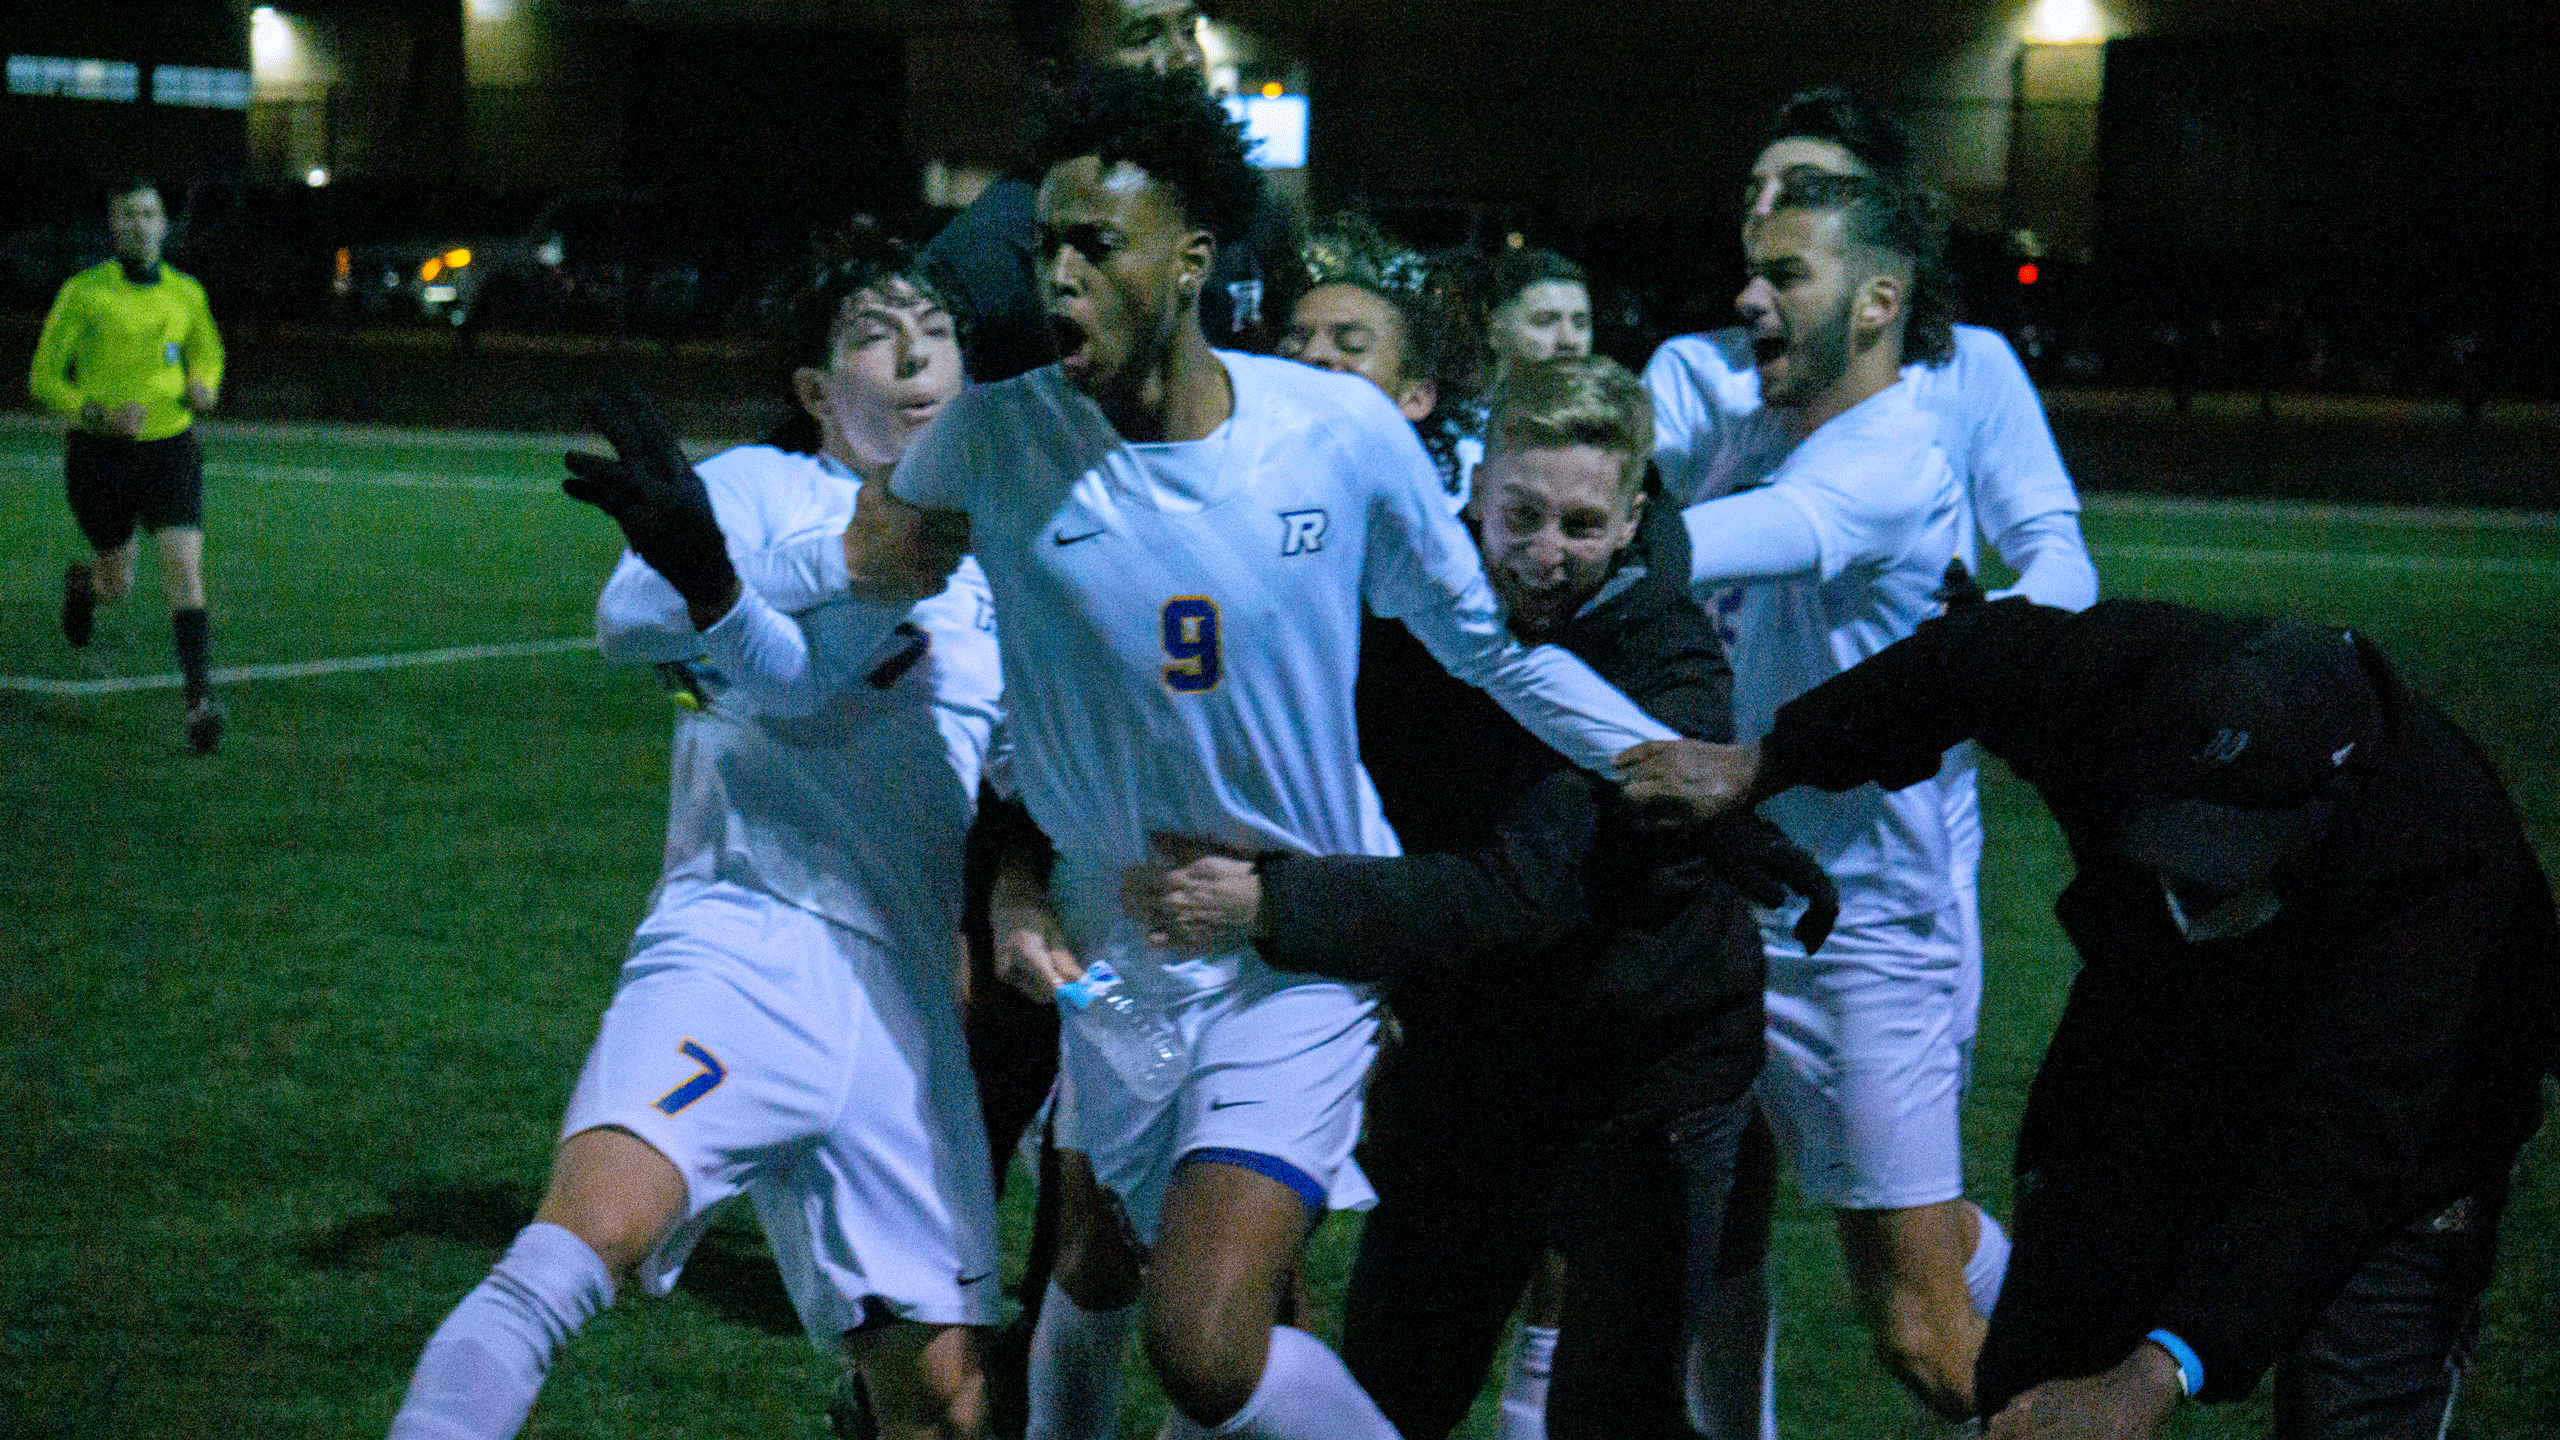 The Rams men's soccer team celebrates its late game heroics